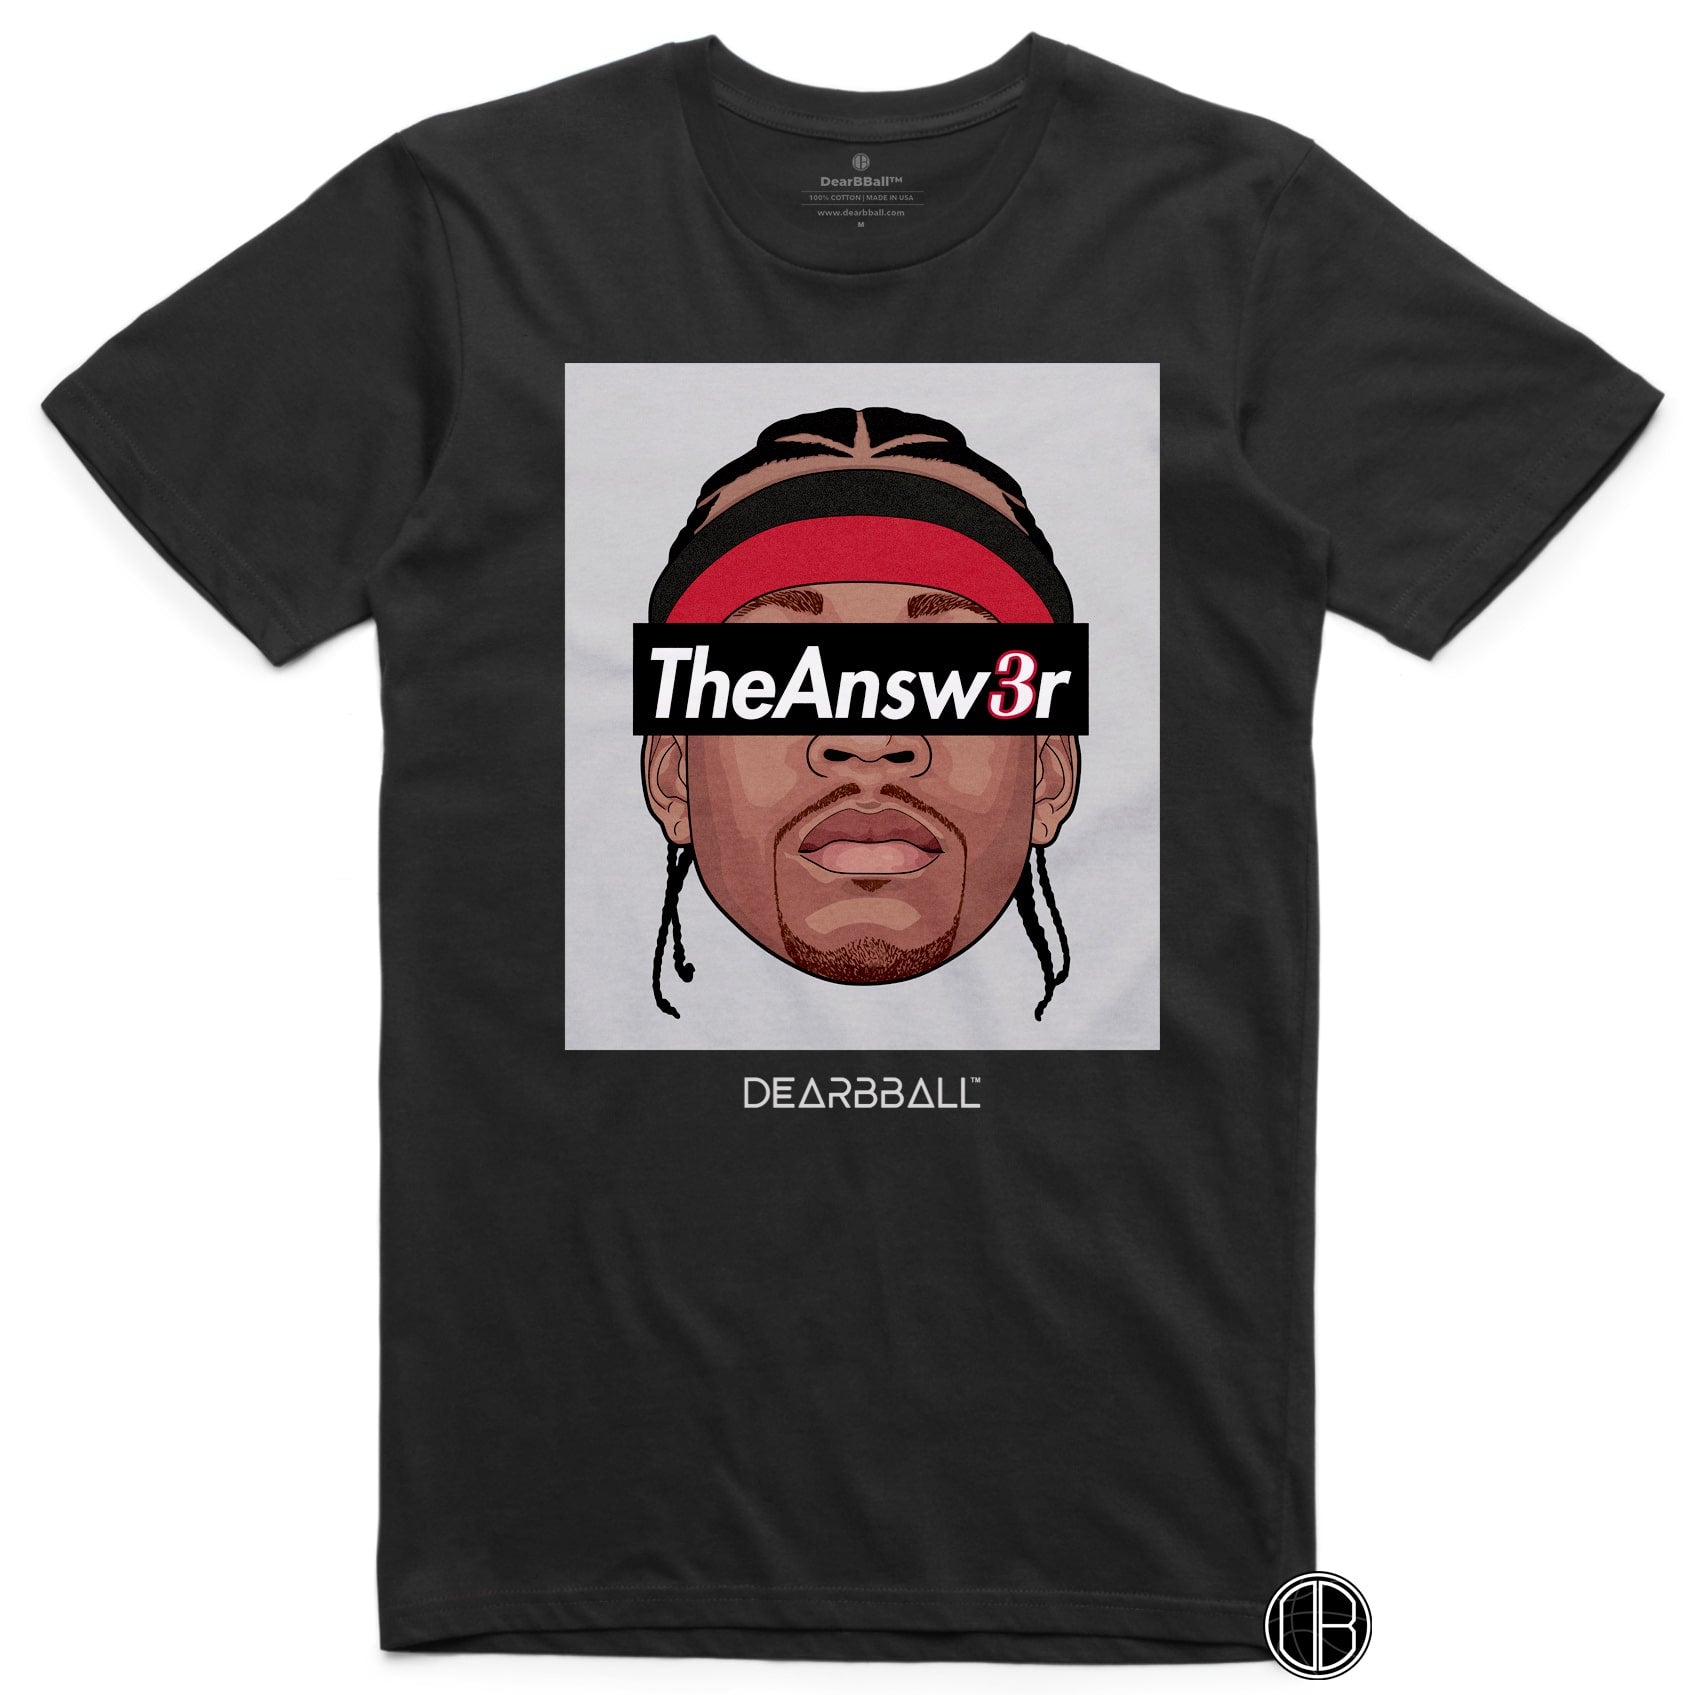 [ENFANT] DearBBall T-Shirt - TheAnsw3r